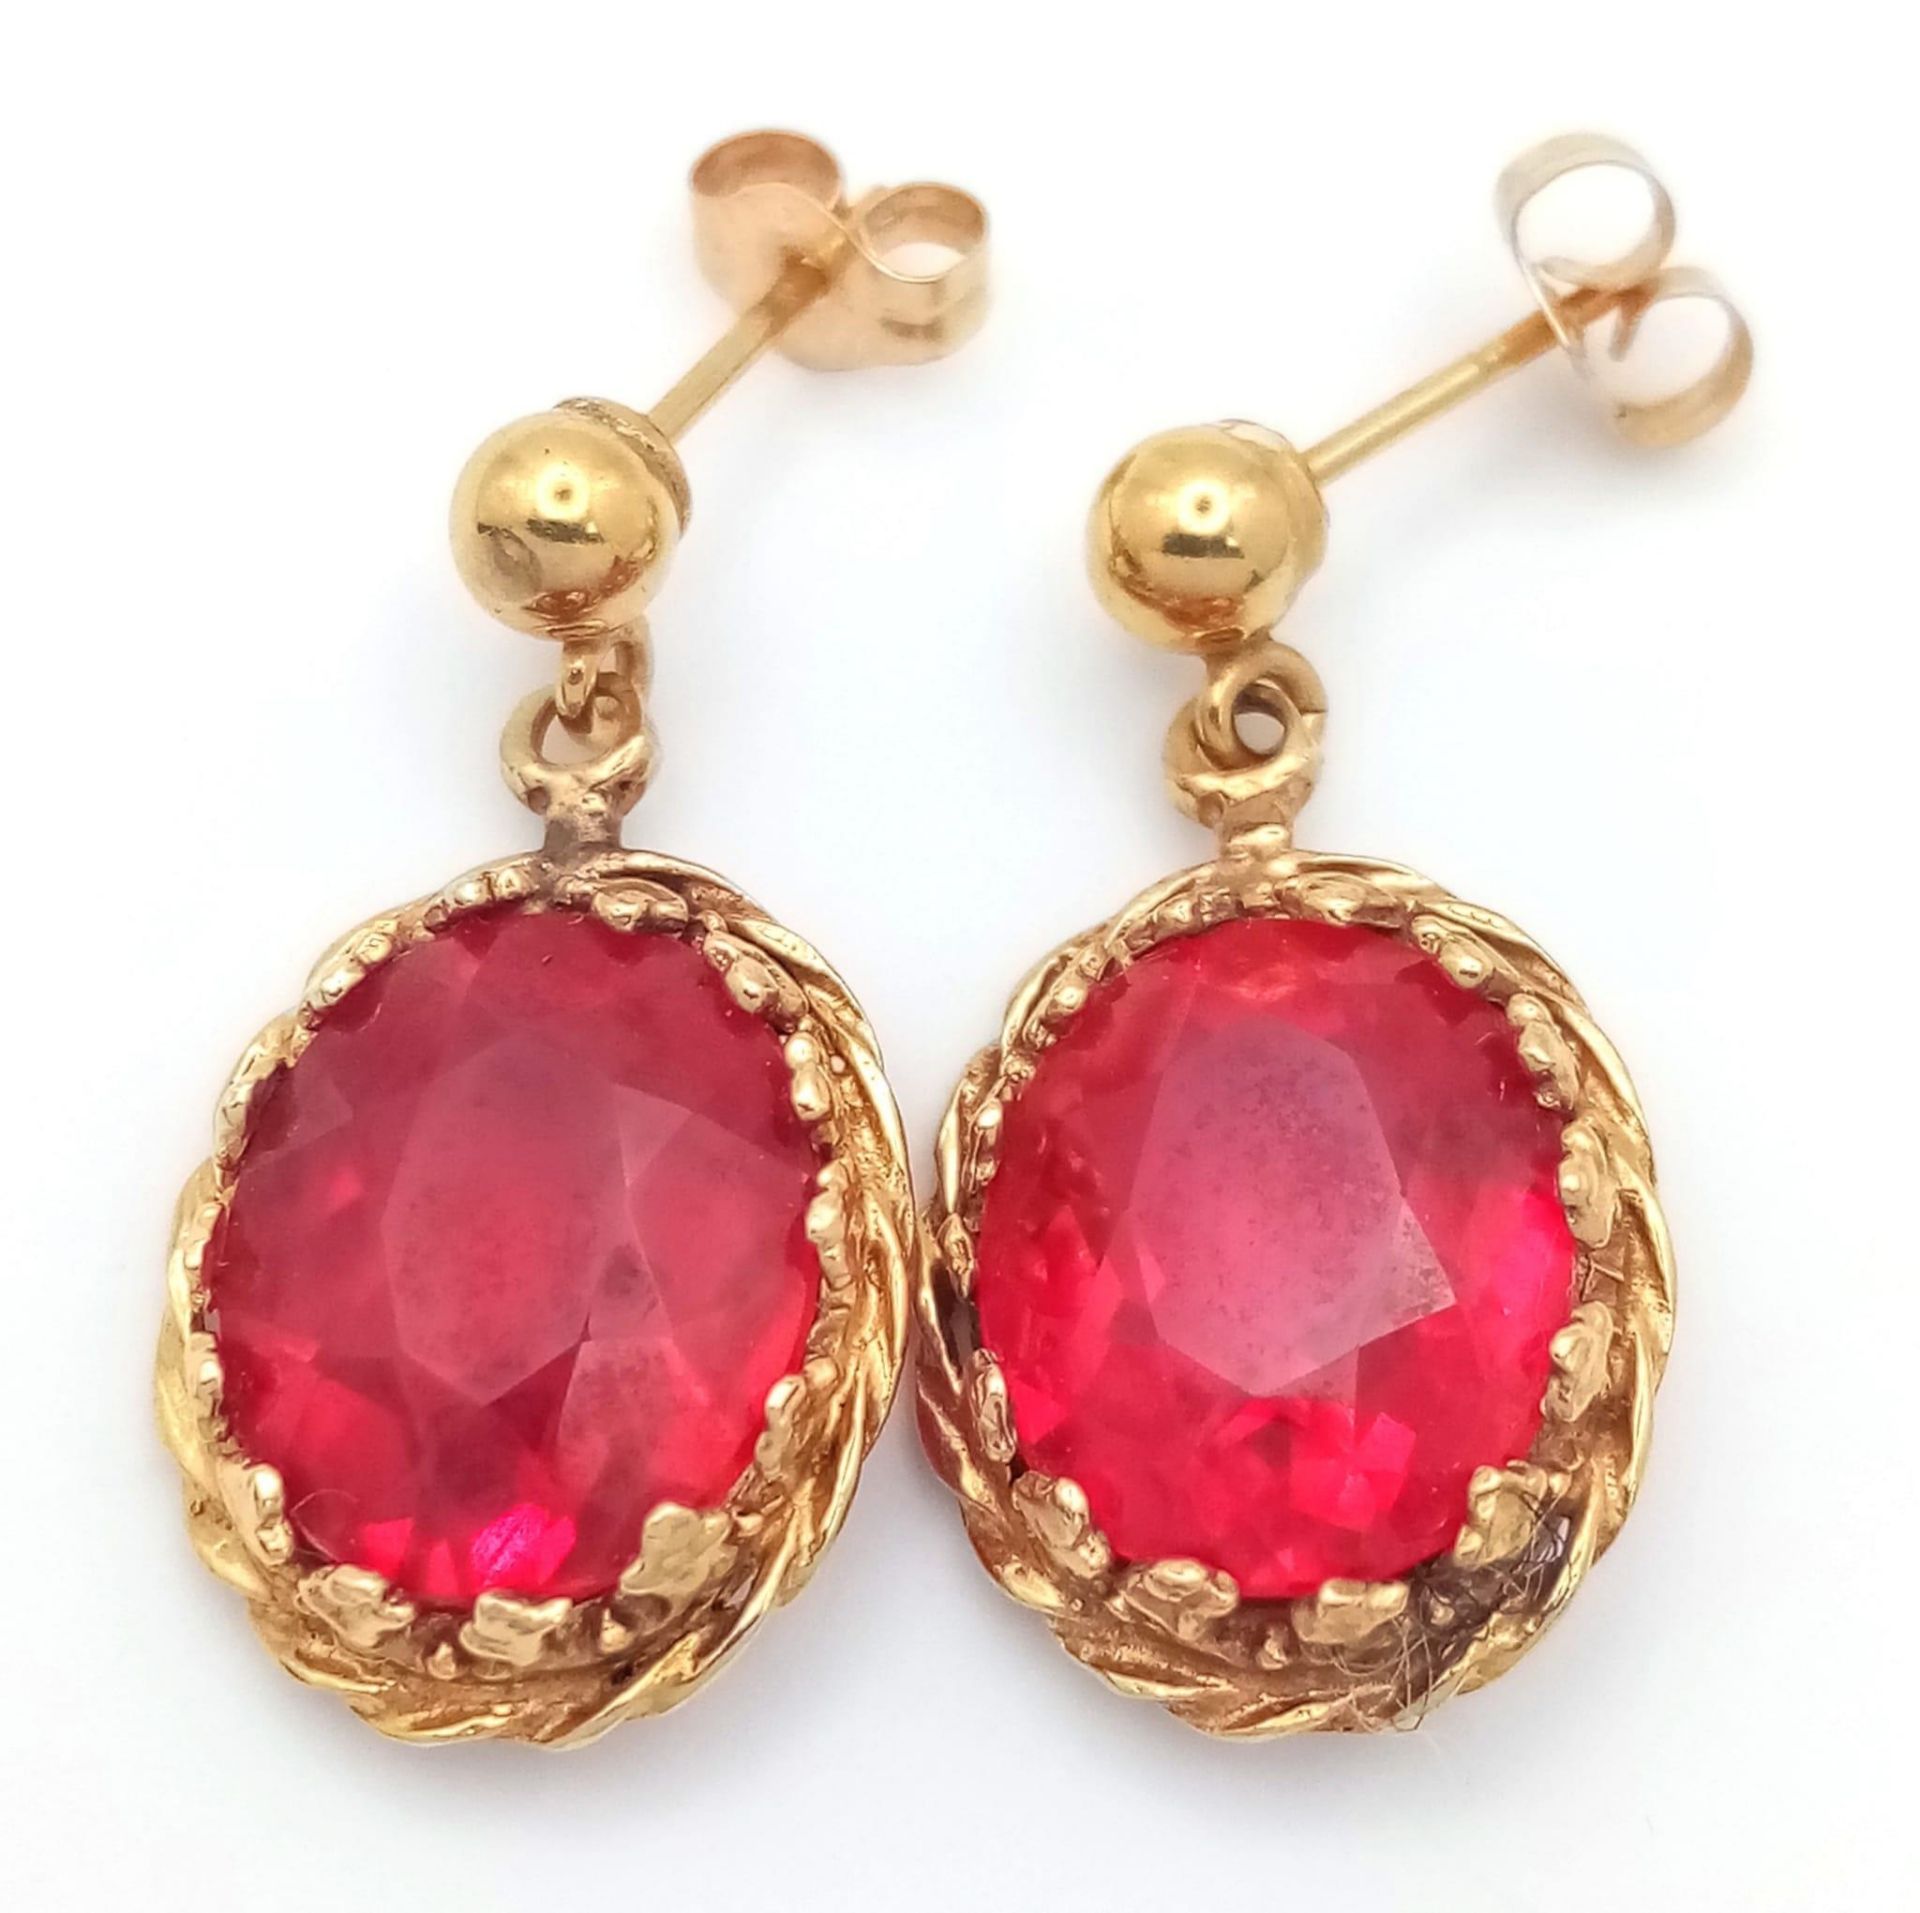 A PAIR OF FABULOUS 14K GOLD AND RUBY EARRINGS . 4.6gms - Image 2 of 5